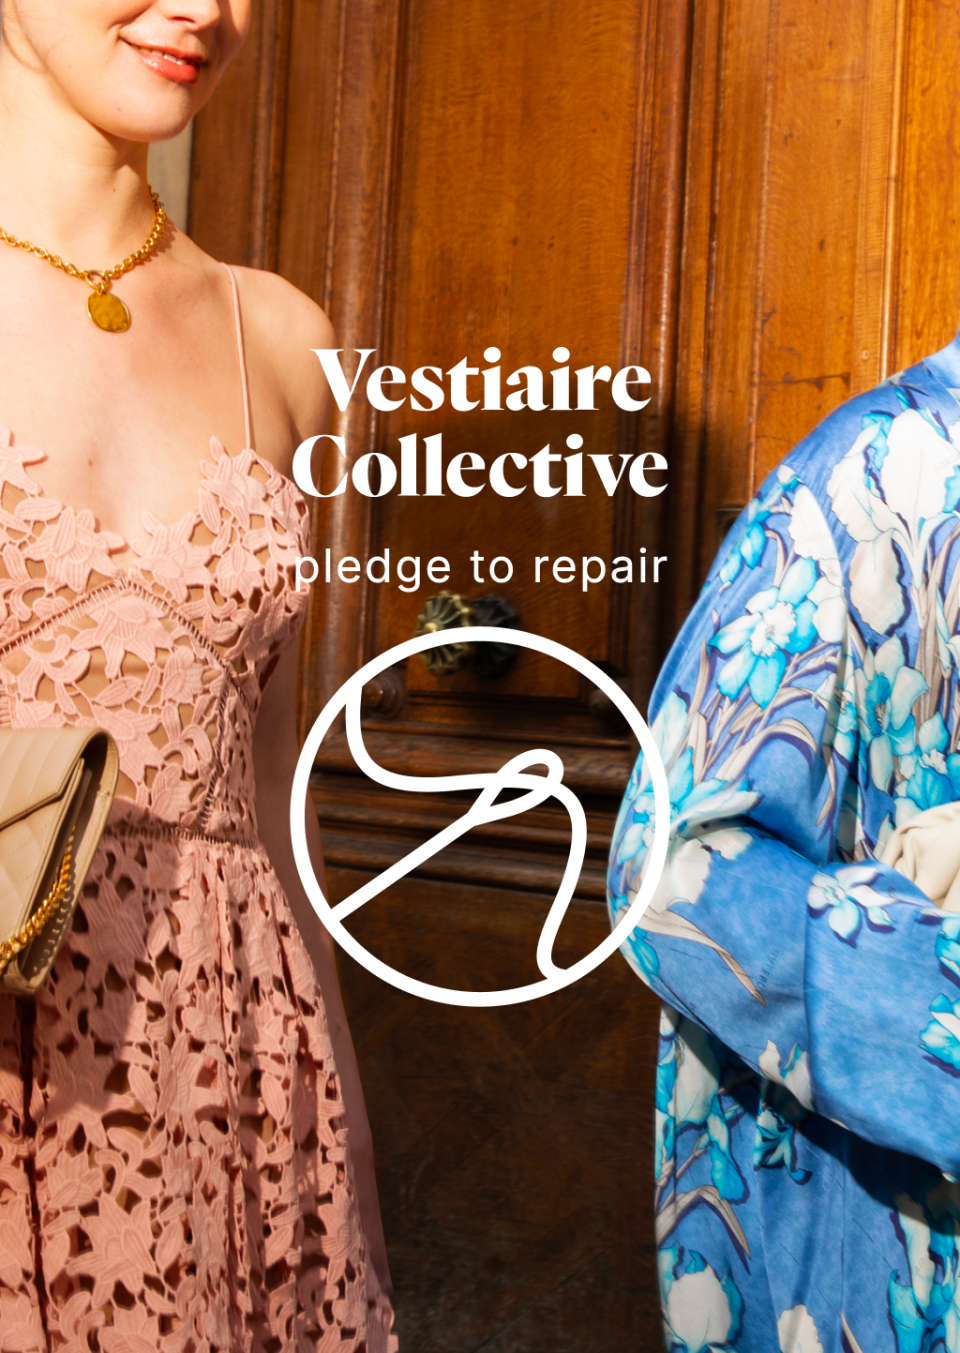 Vestiaire Collective has signed Sojo’s Pledge to Repair.